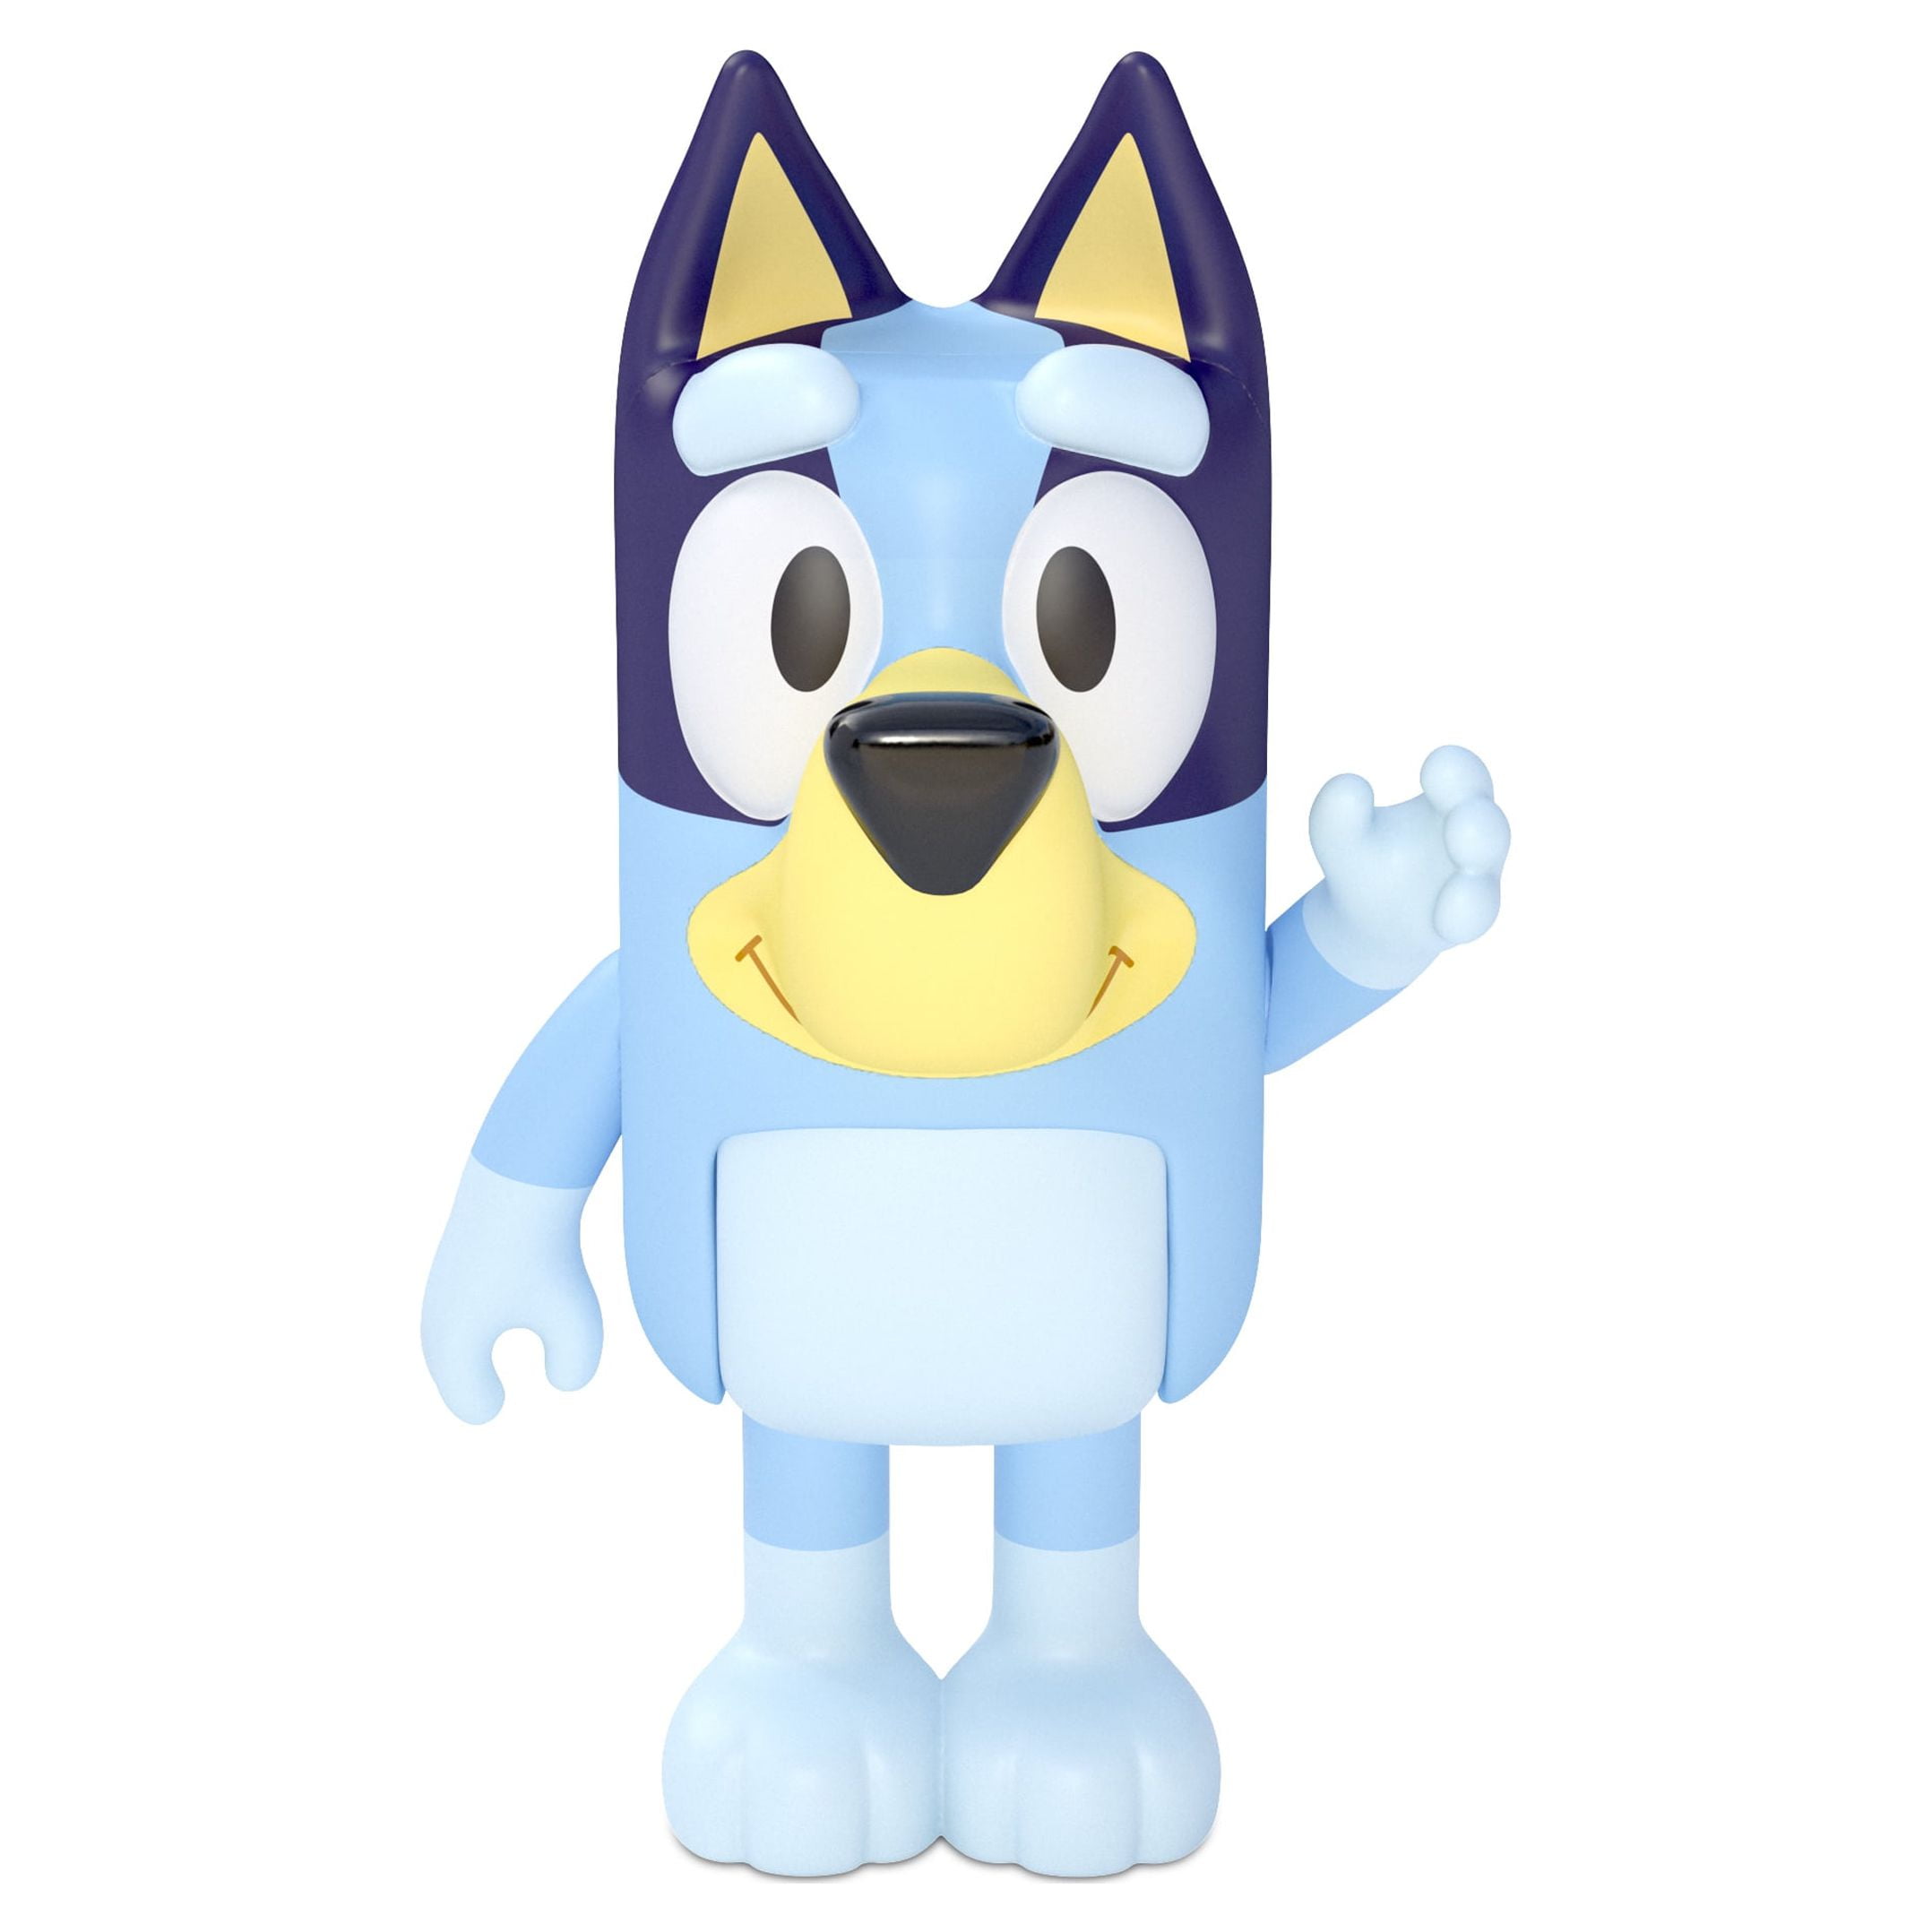 Bluey and Friends 4 Pack of 2.5-3 Dog  Poseable Figures (13052), School  4-pack